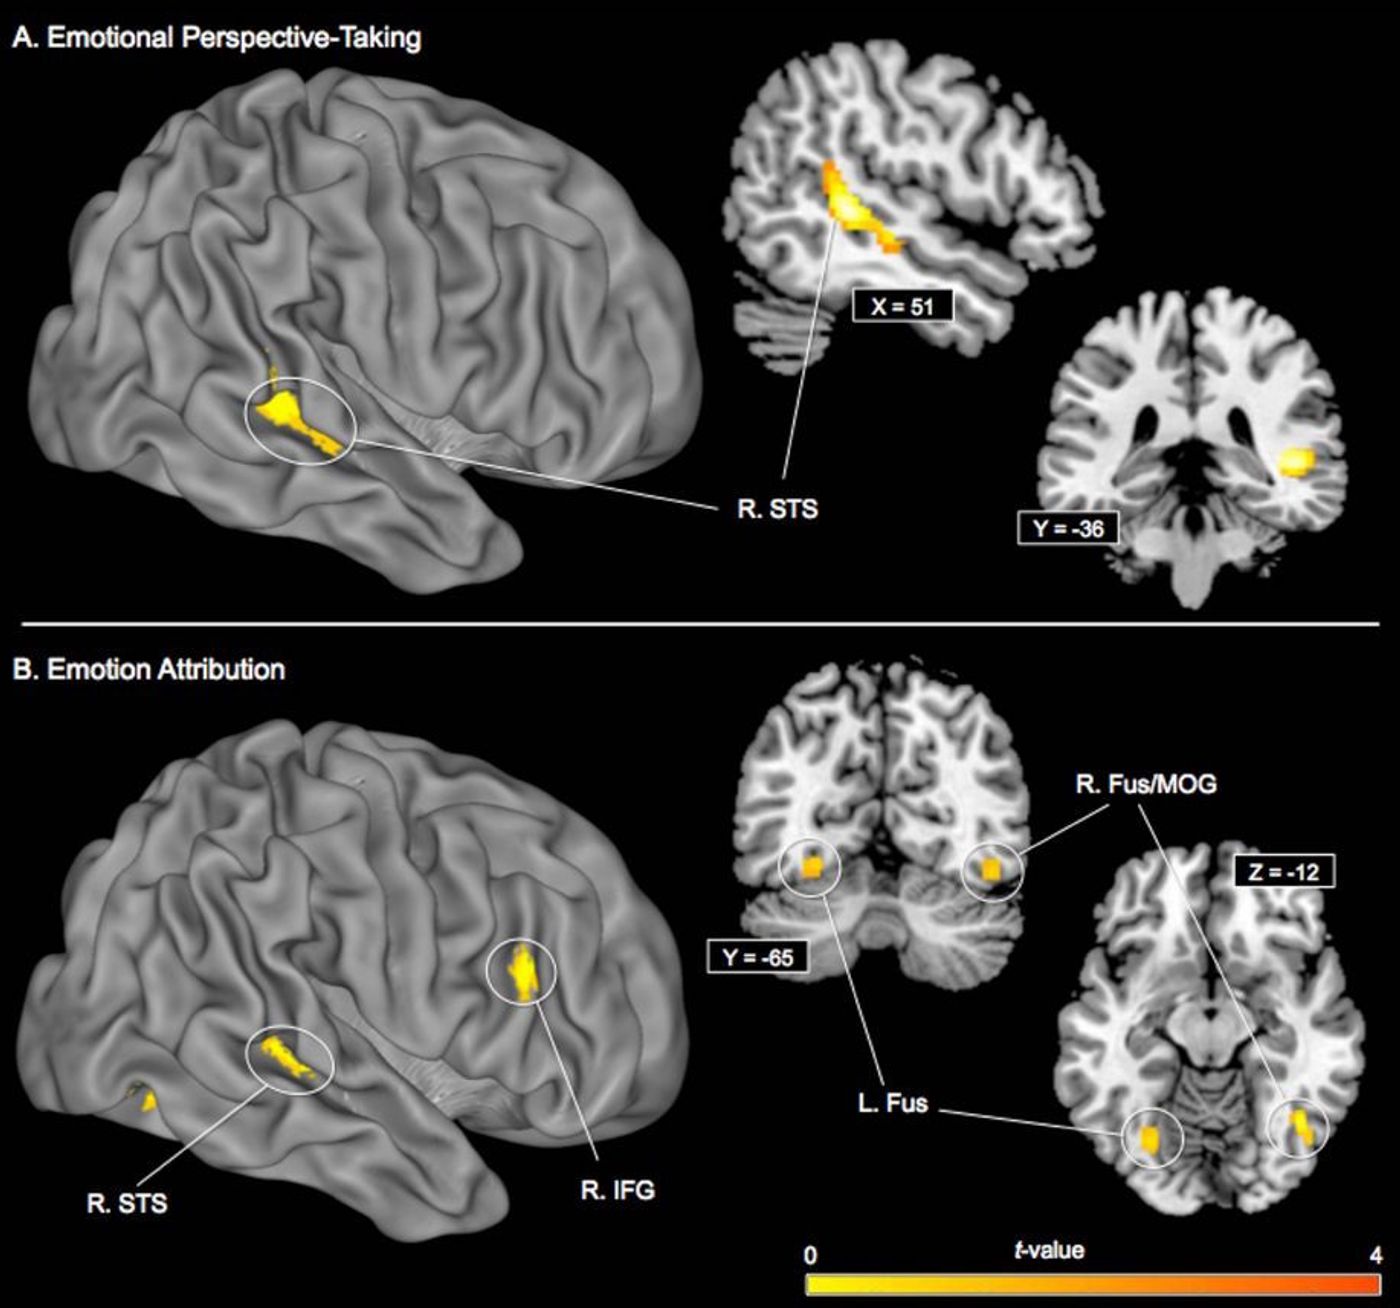 Oxytocin DNA methylation and brain activity during social-cognitive processing (A) emotional perspective-taking (B) emotion attribution. 